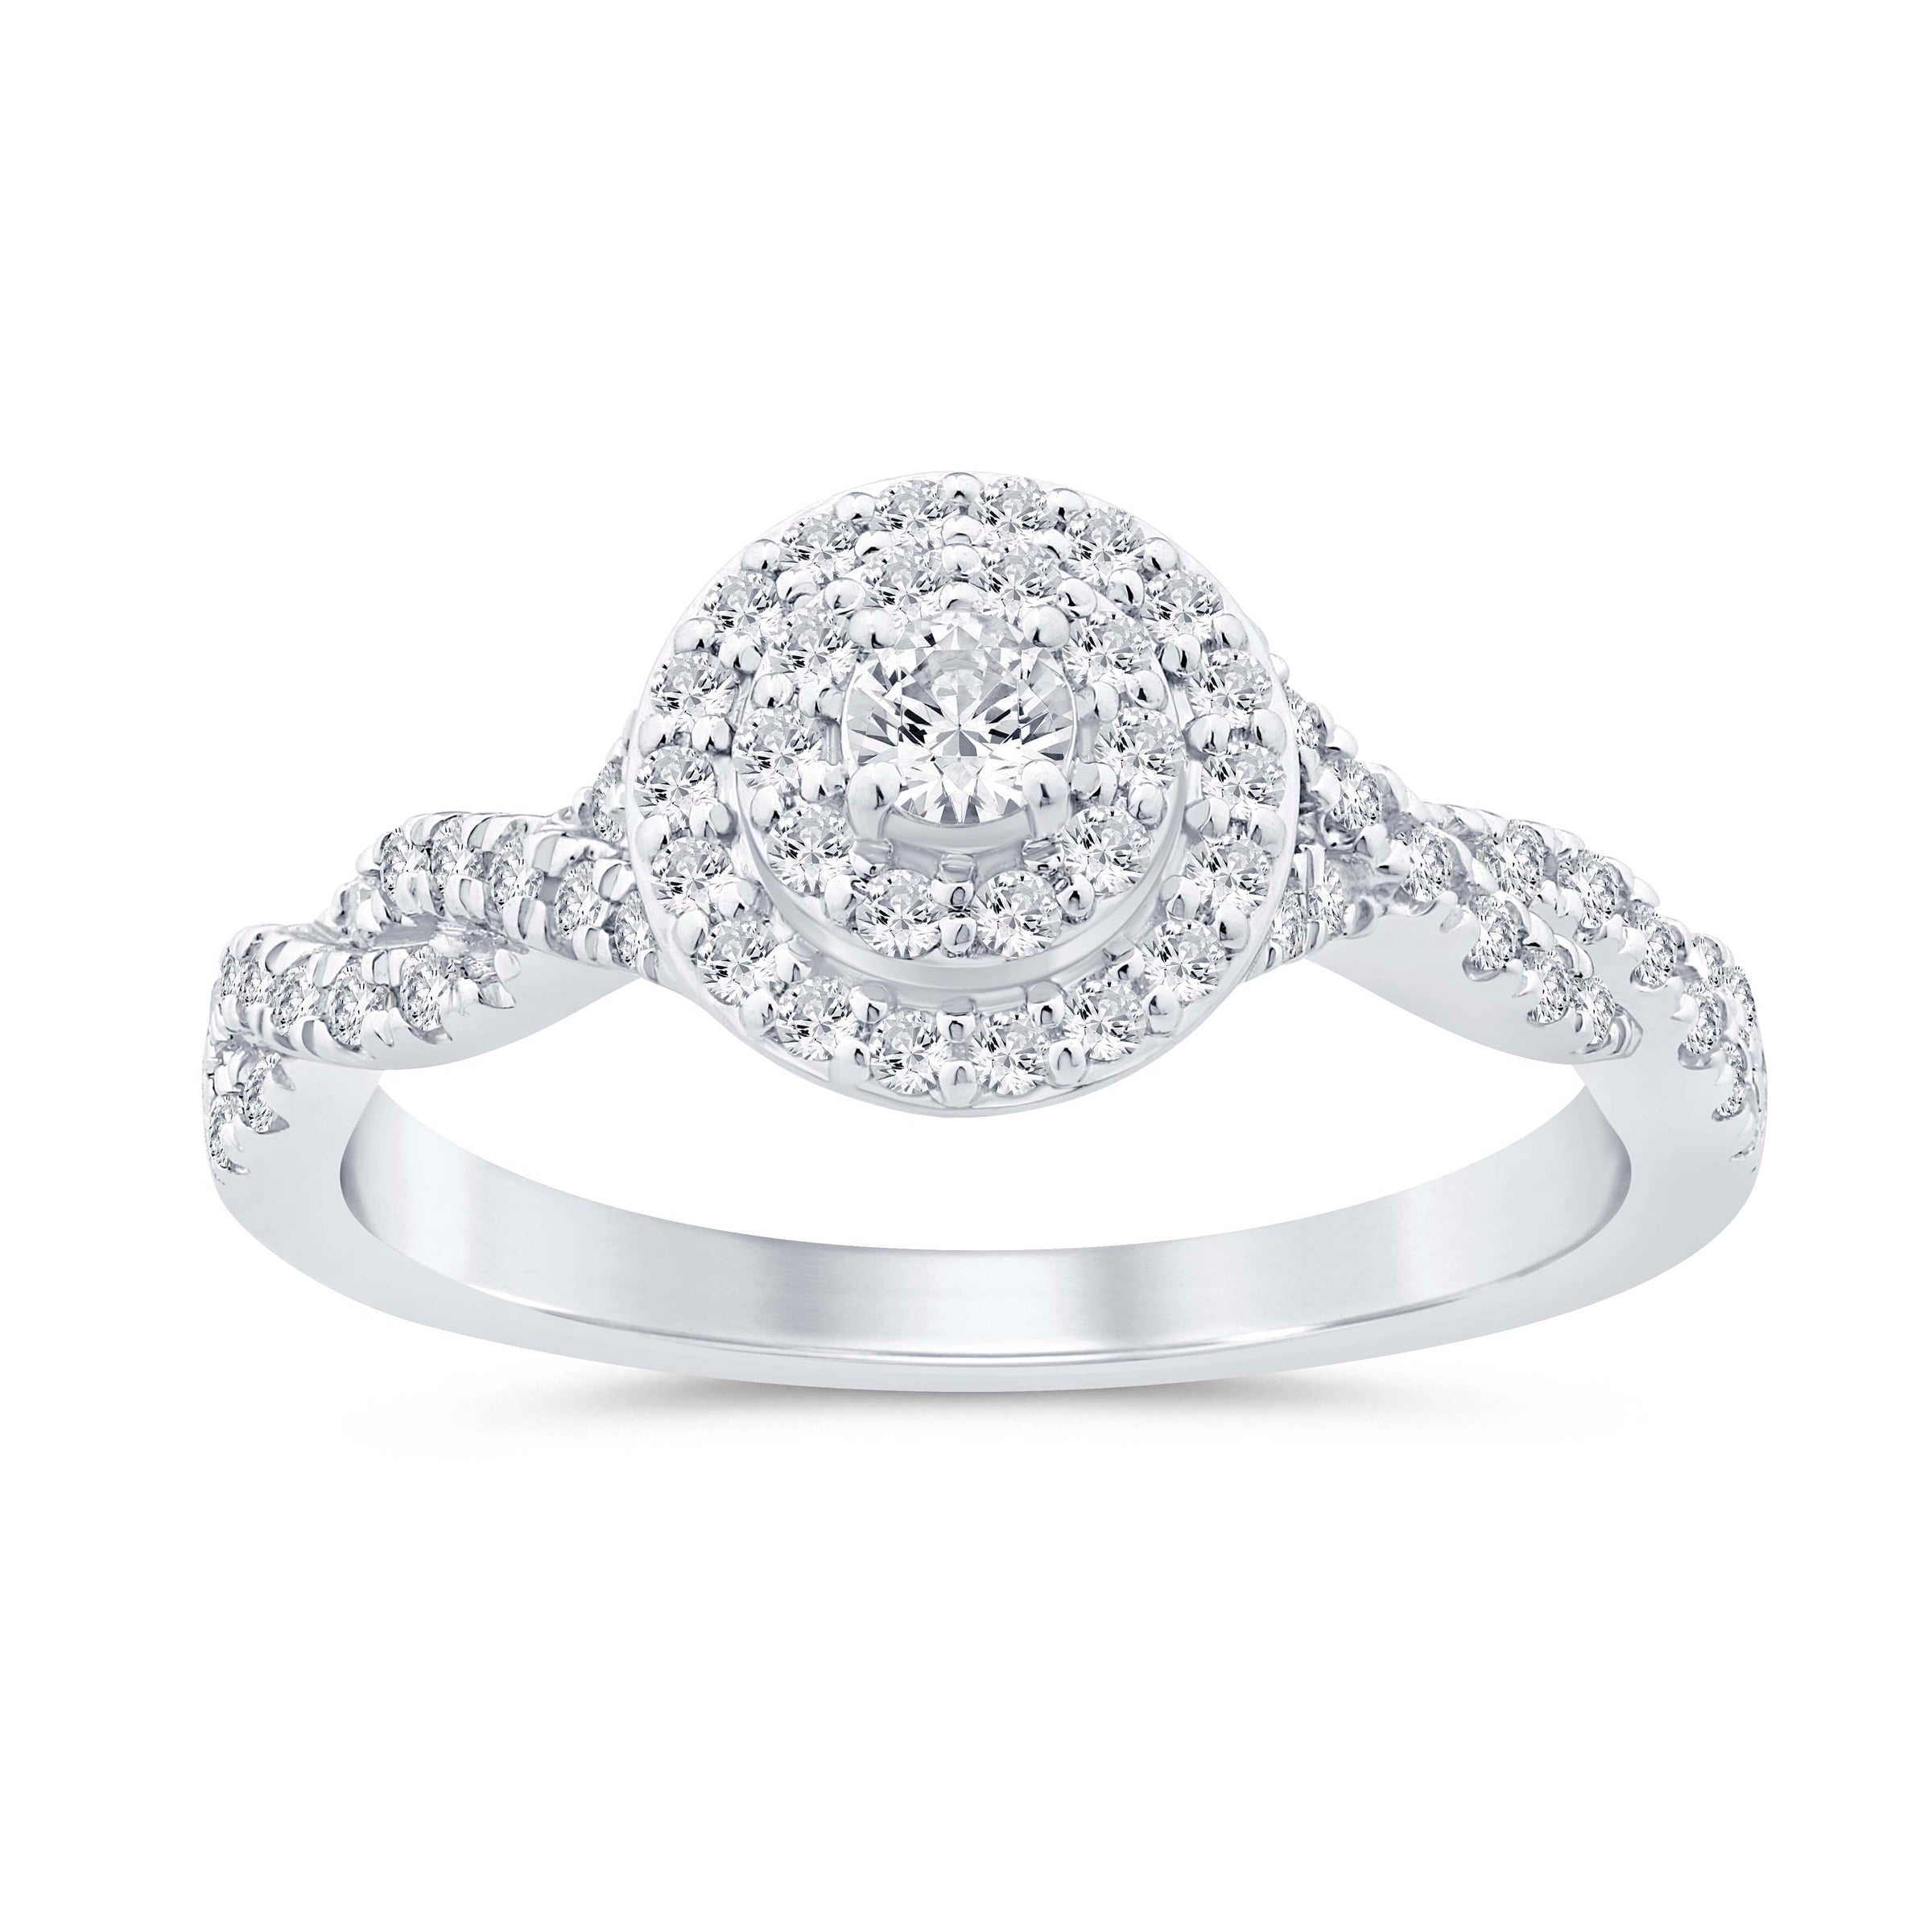 Double Halo Solitaire Ring with 0.50ct of Diamonds in 10ct White Gold Rings Bevilles 